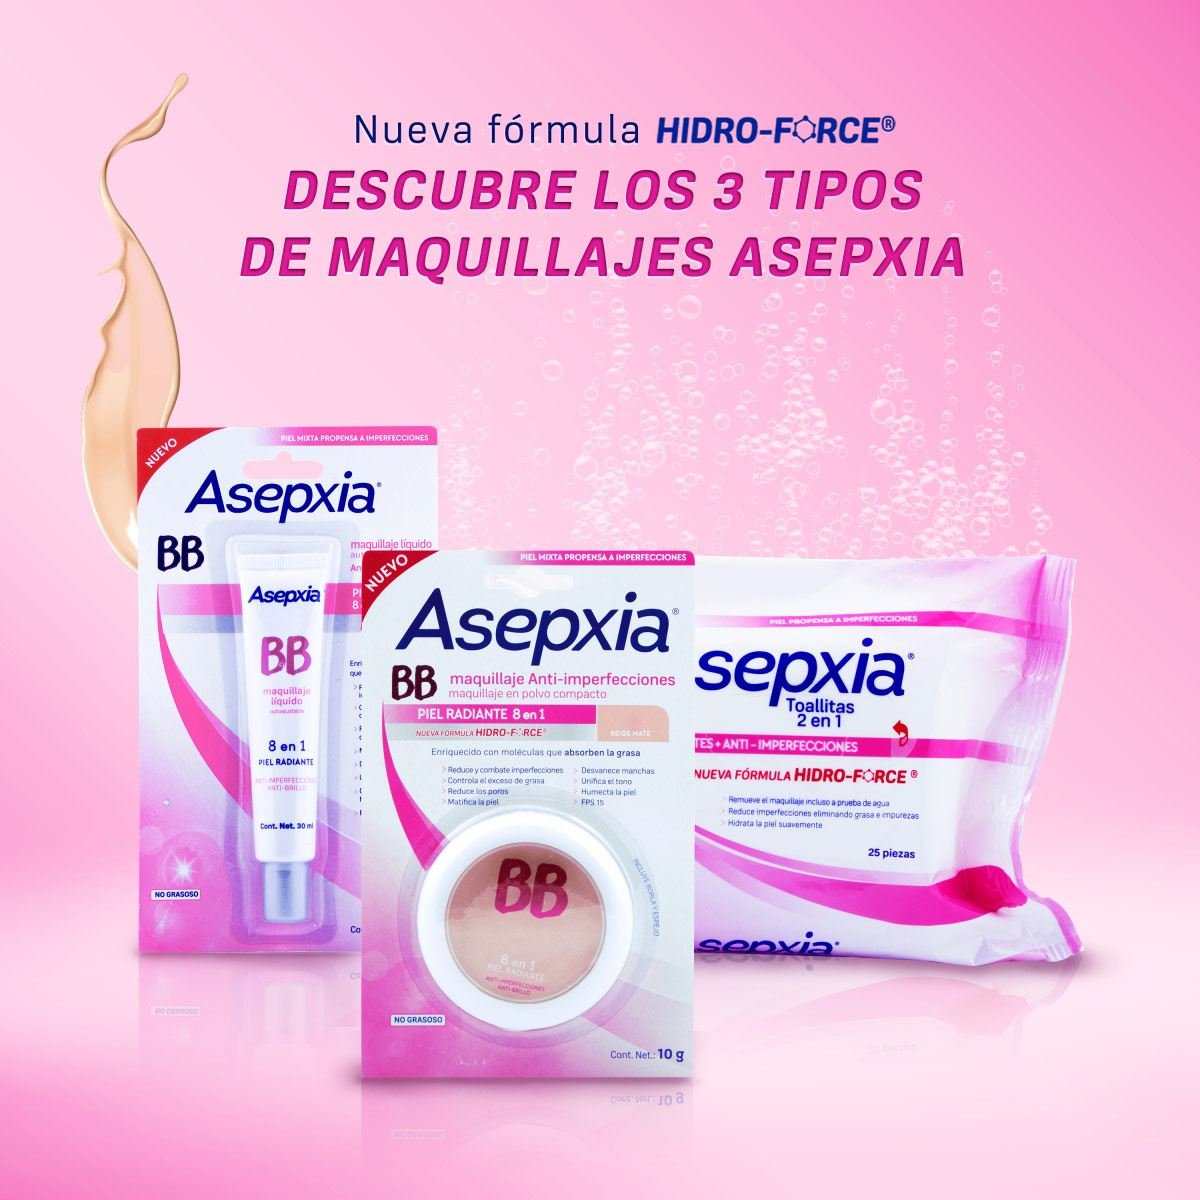 Maquillaje BB Polvo E/6 FPS 15 Natural Mate 10 G Asepxia